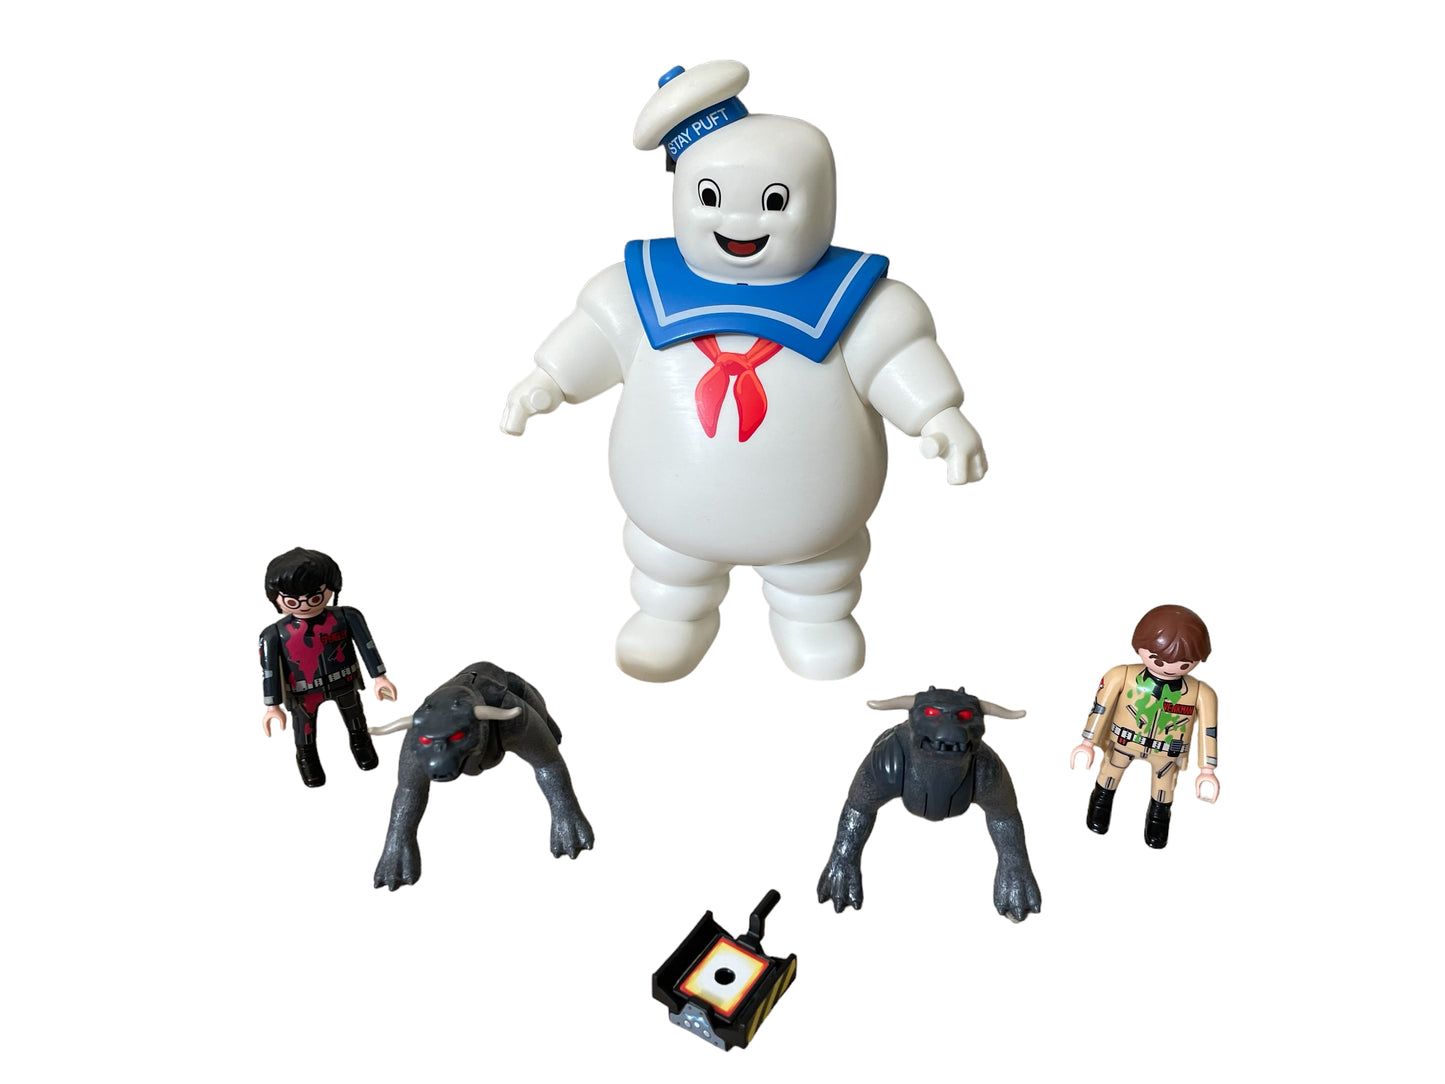 3 in 1 Ghostbusers Playmobil Set including: Ghostbusters Fire Station, Ghostbusters Squad Car and Stay Puft Mashmallow Man